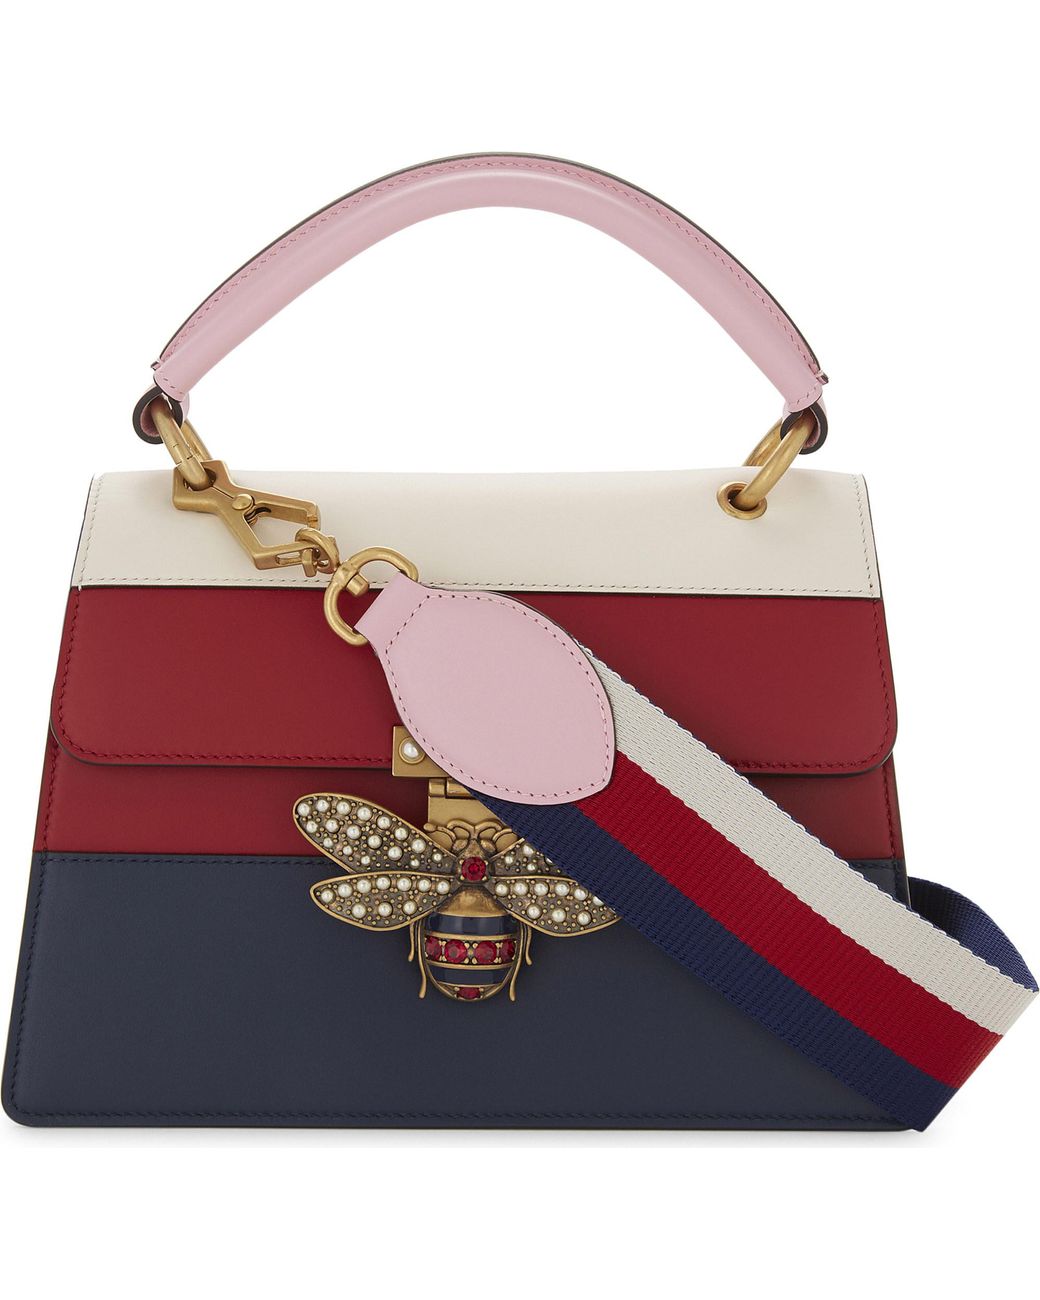 Gucci Bee Clasp Striped Leather Shoulder Bag in Red